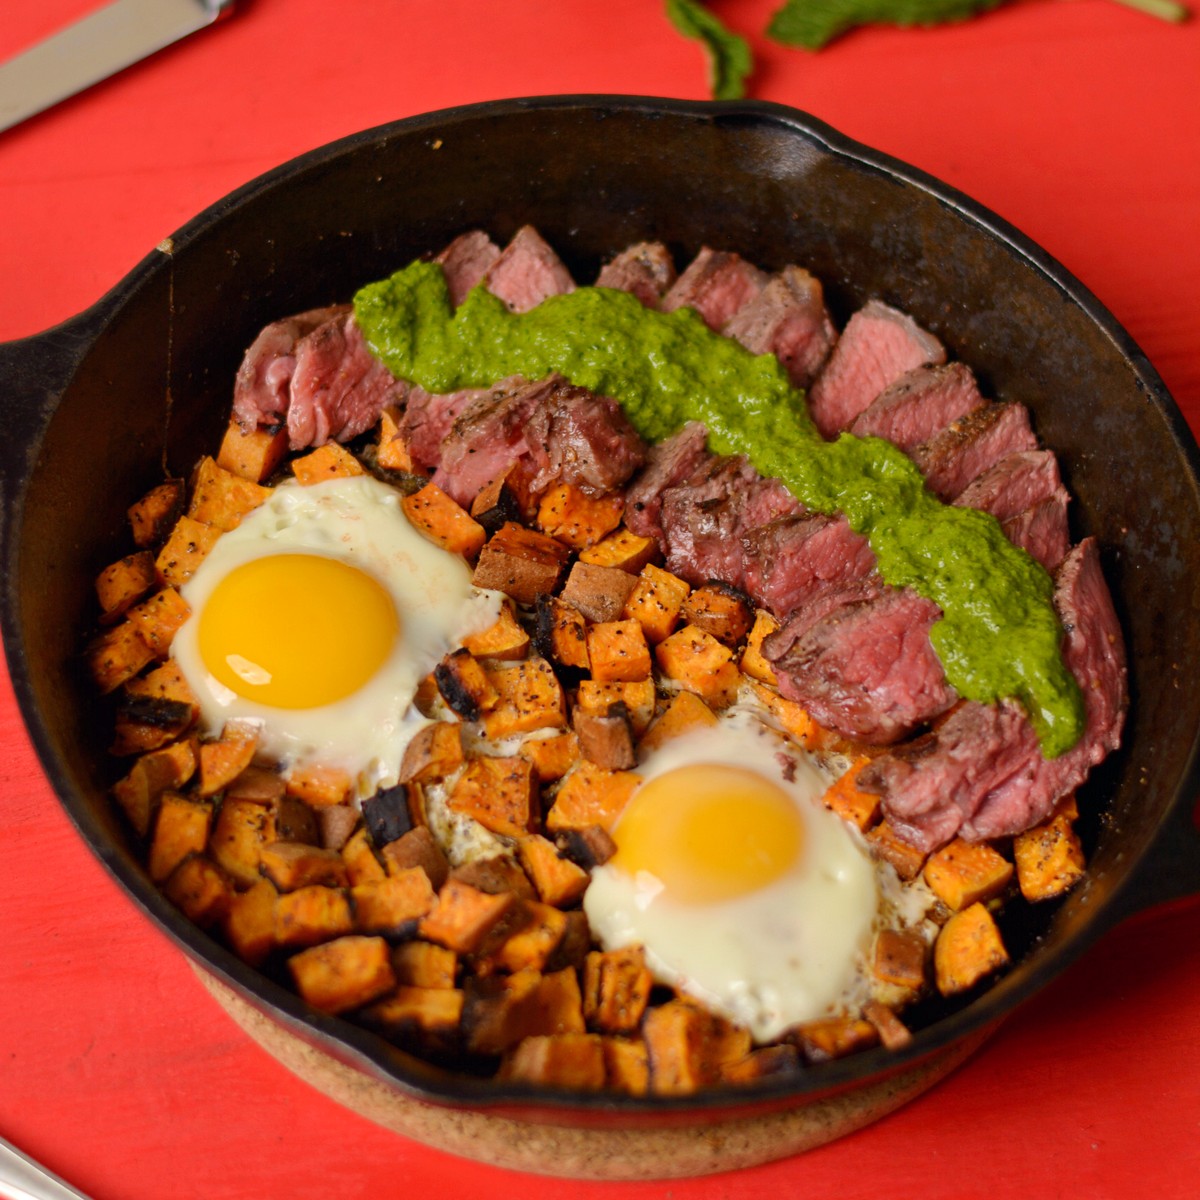 A skillet with steak, chimichurri sauce, eggs, and potatoes.